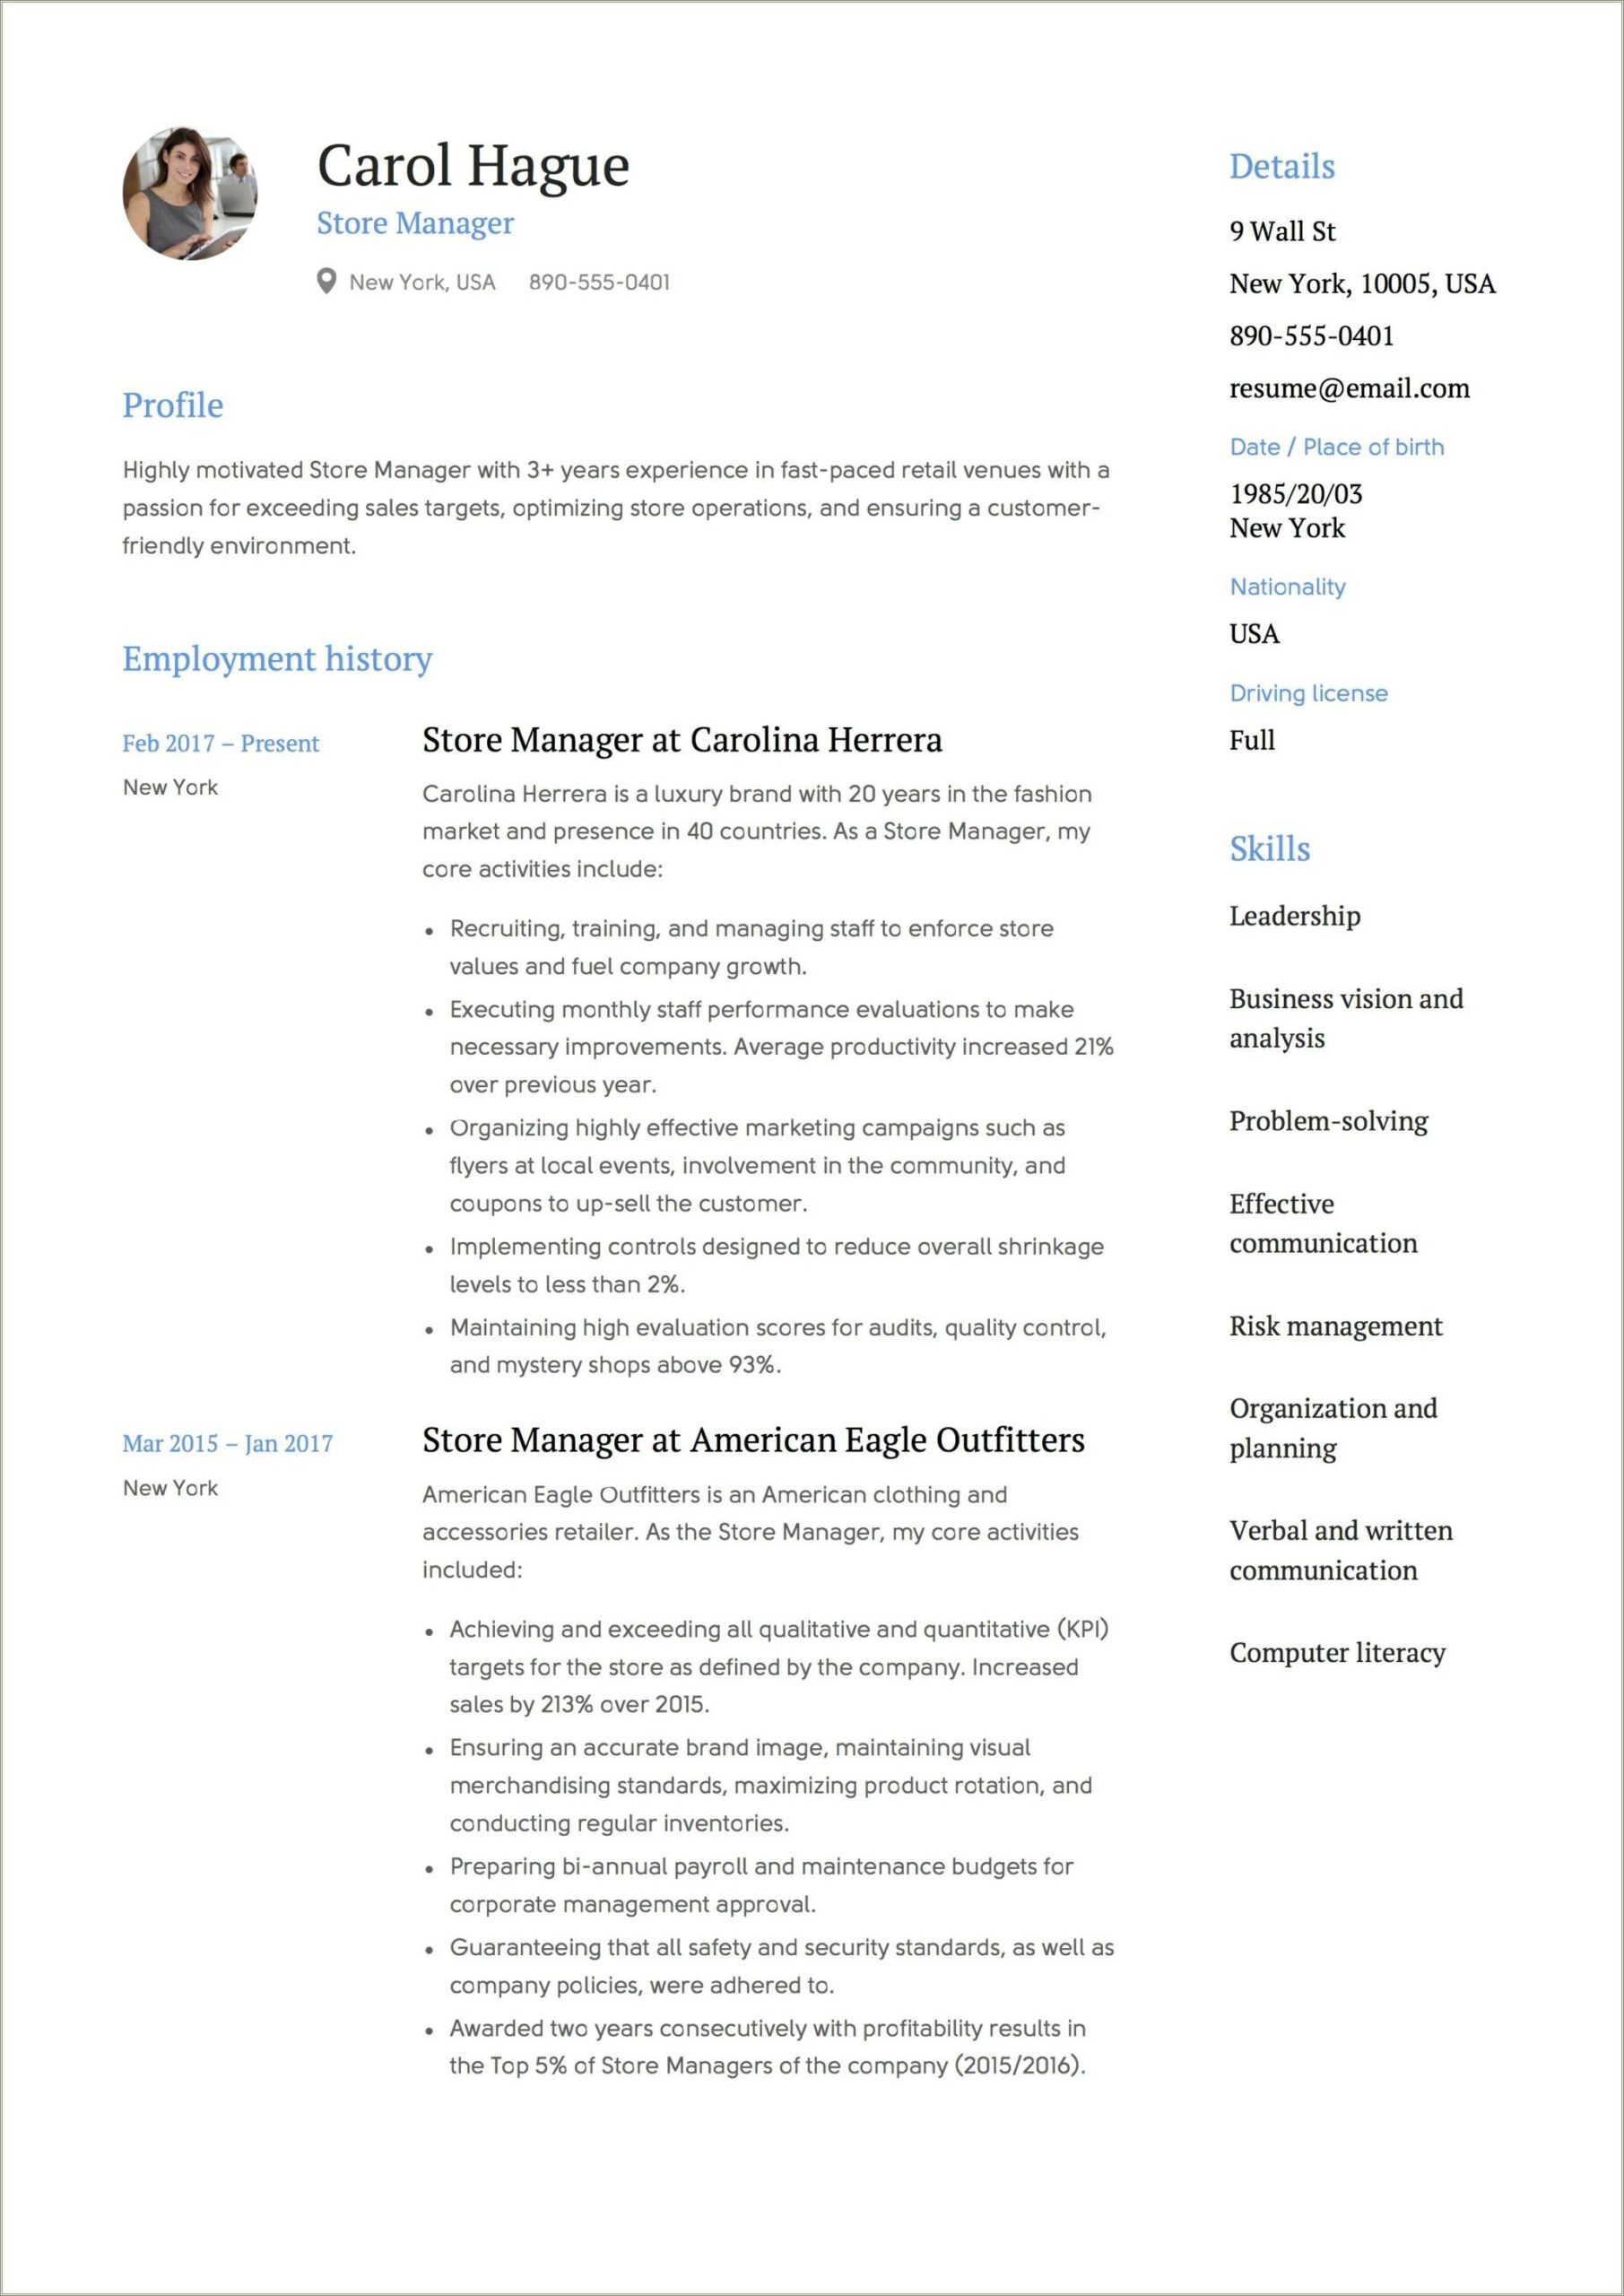 Resume Bullets For A Grocery Store Manager